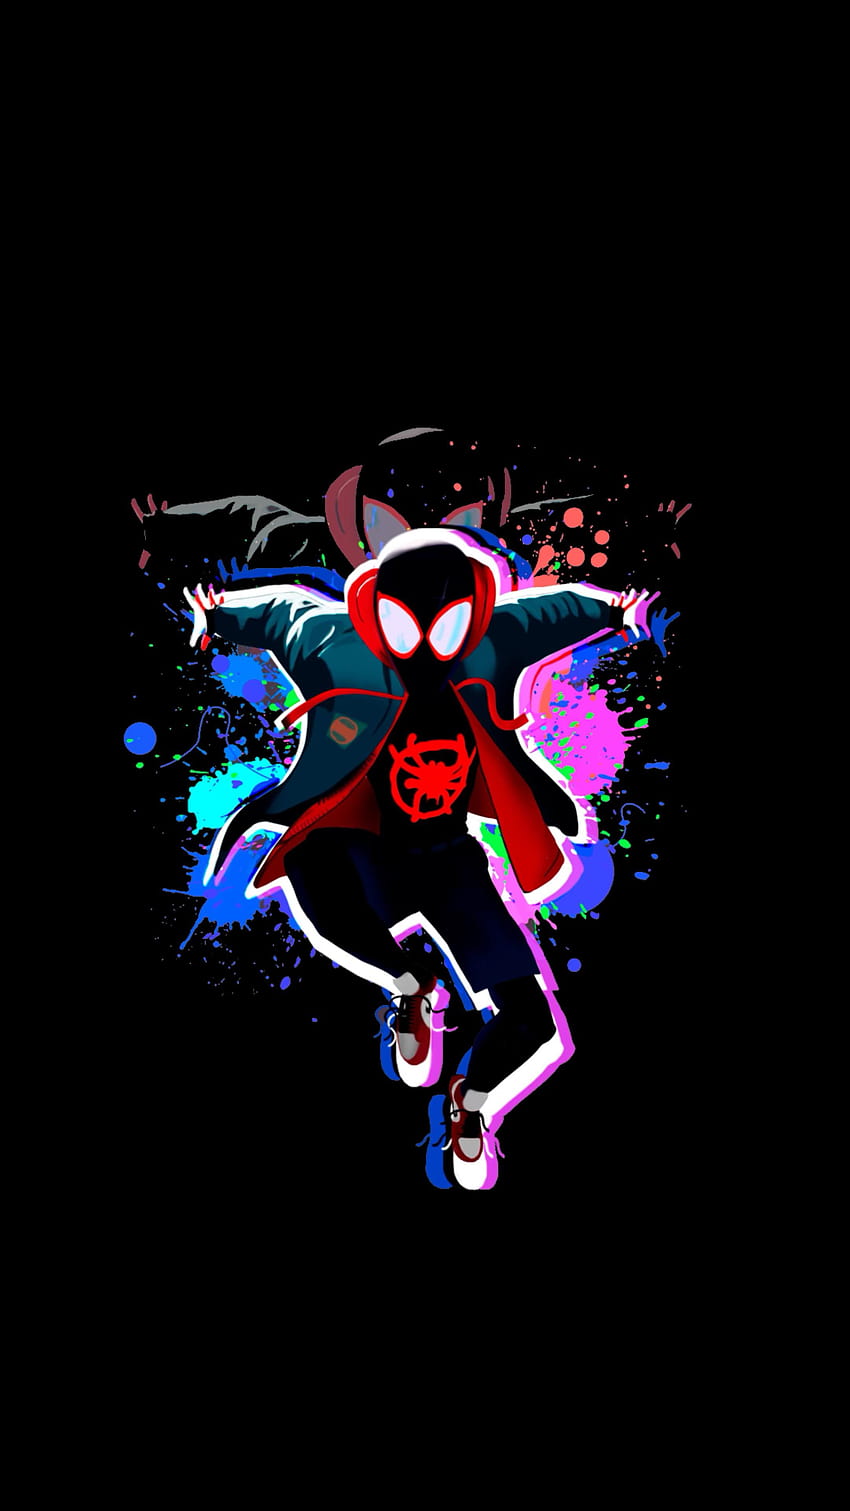 New Miles Morales PS5 phone wallpaper for screens with a 1440 x 2960 screen  resolution Check out my page for more sizes  rSpidermanPS4